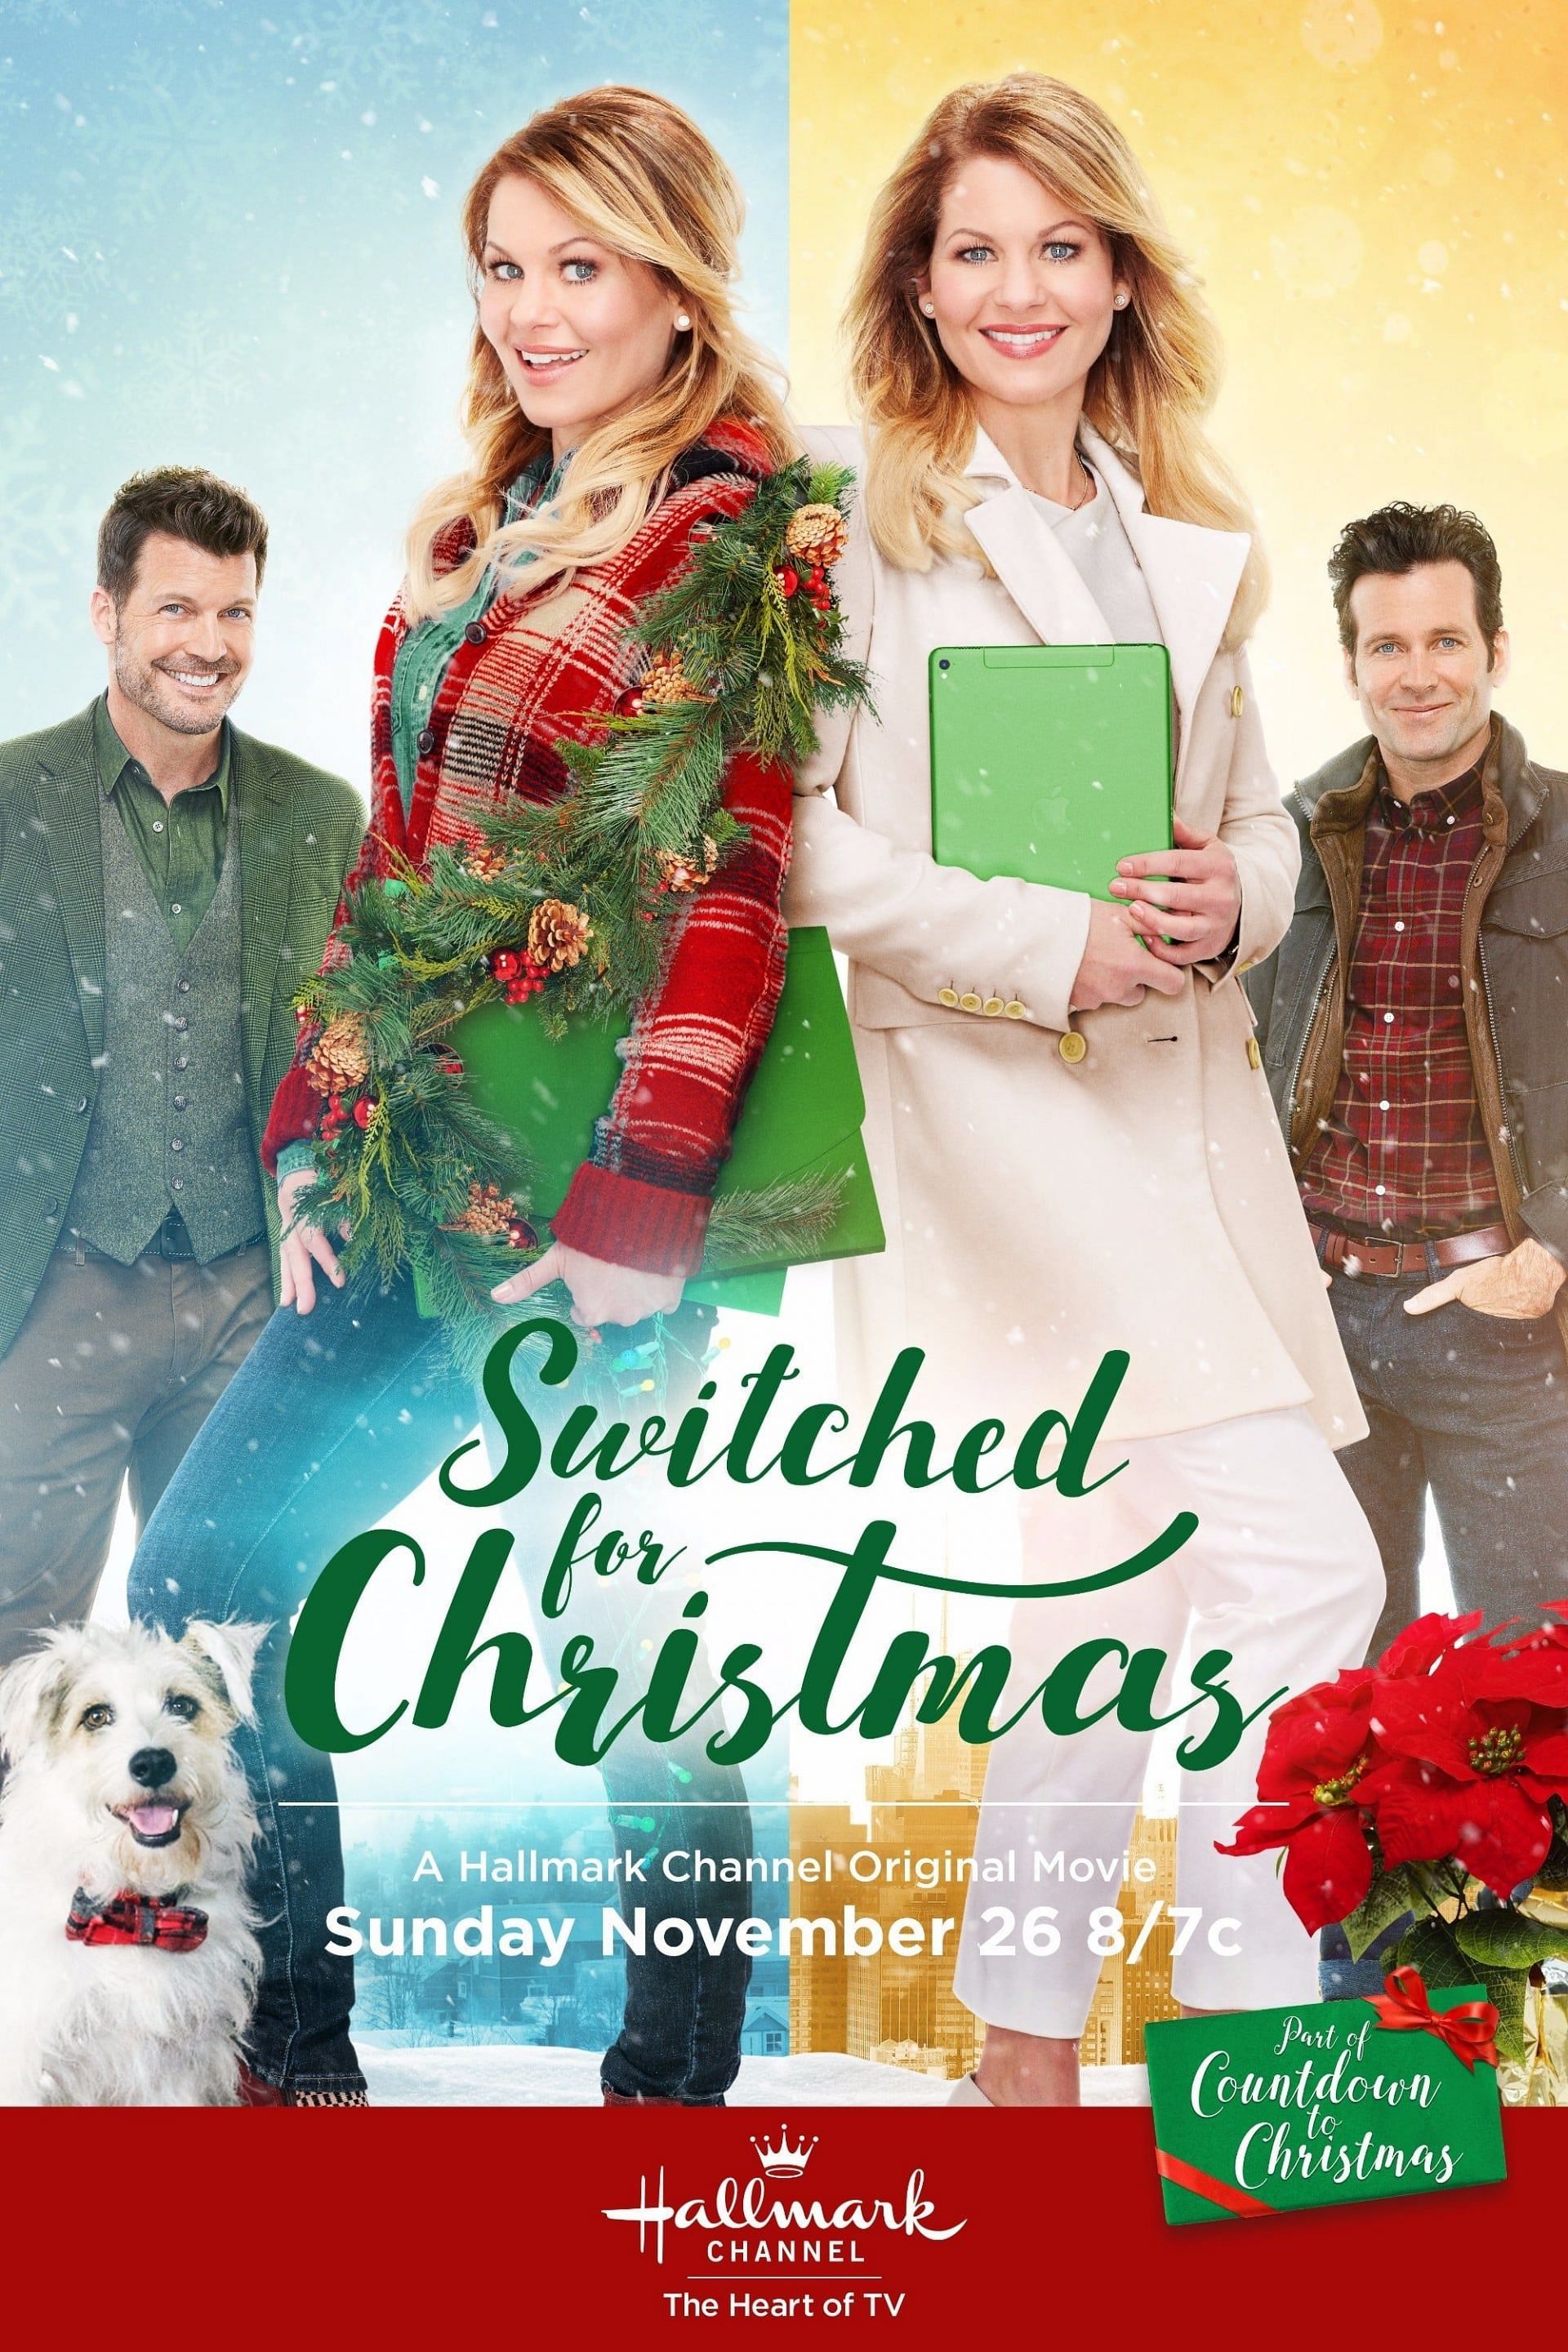 Switched for Christmas (Image via Hallmark Channel)